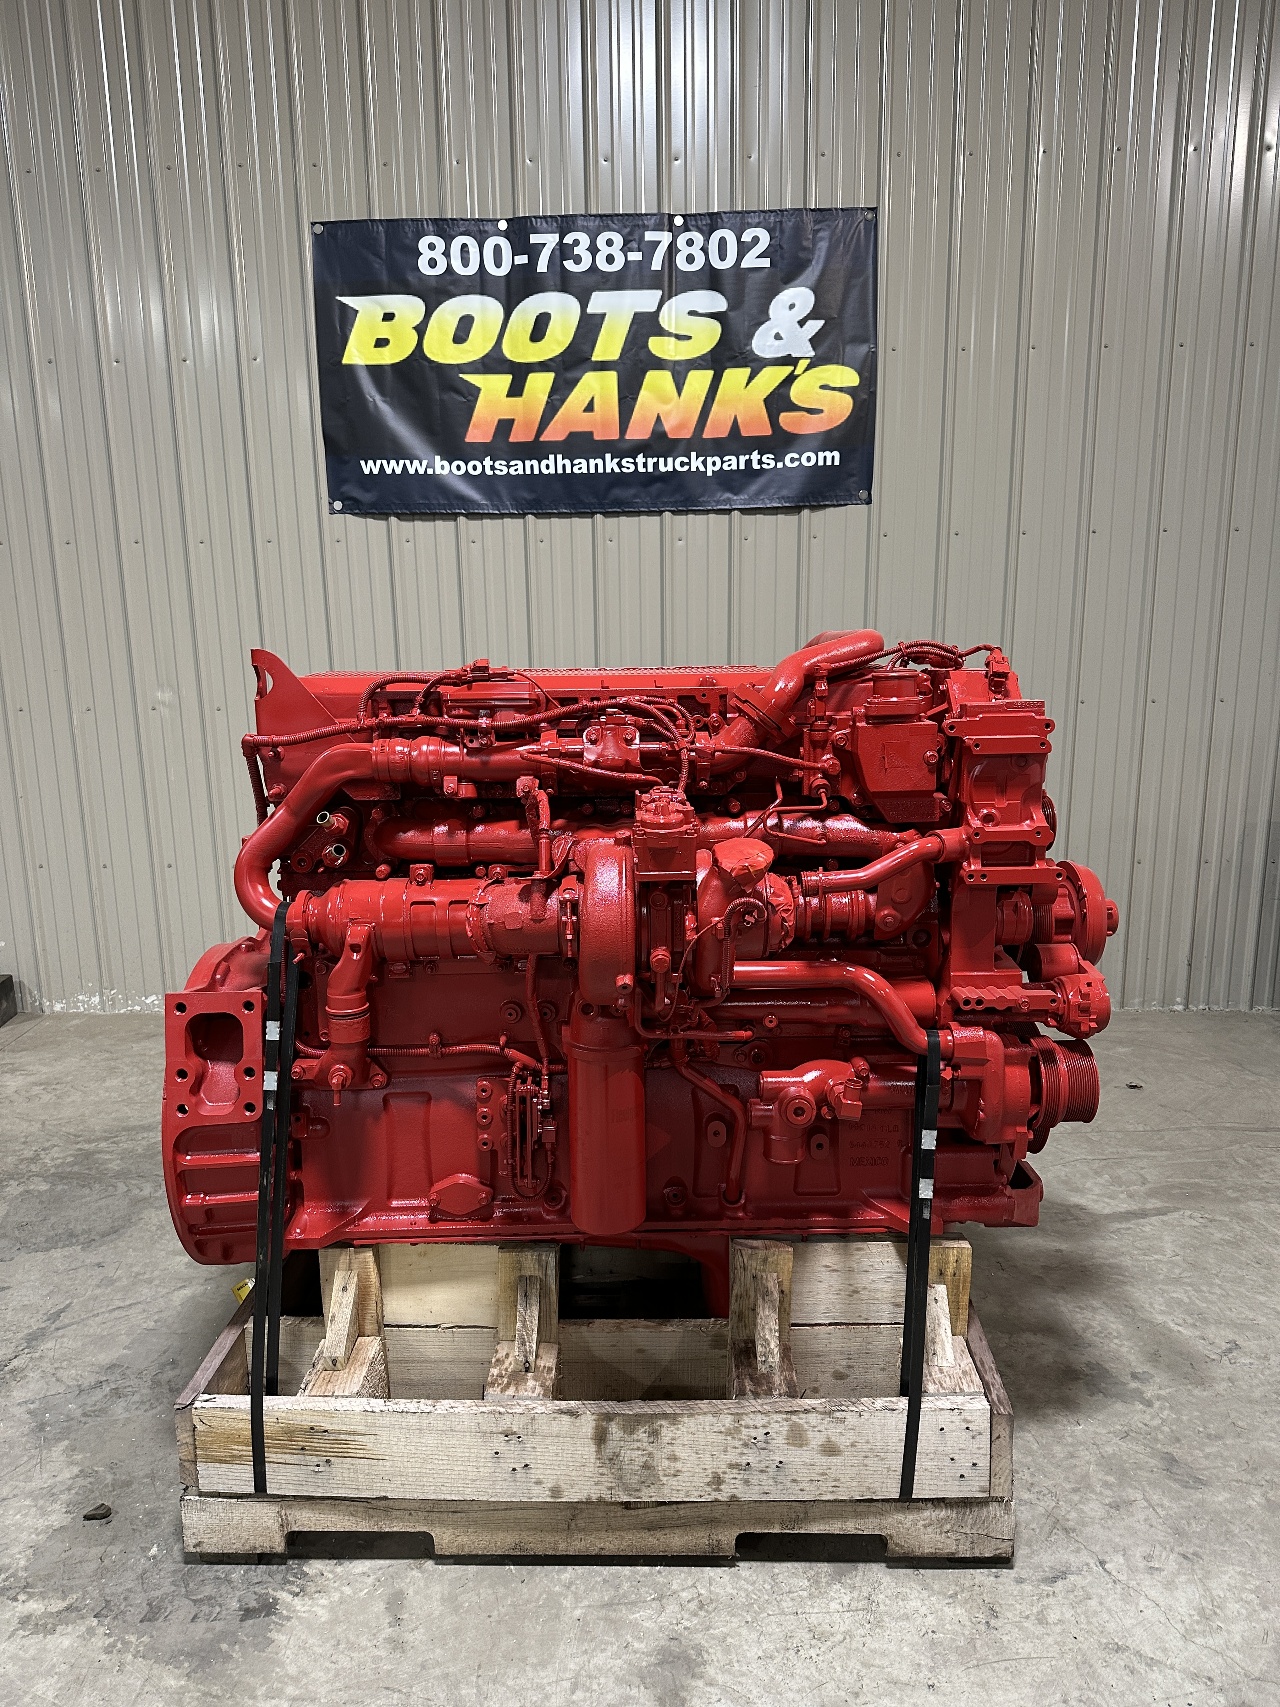 USED 2019 CUMMINS X15 COMPLETE ENGINE TRUCK PARTS #1990